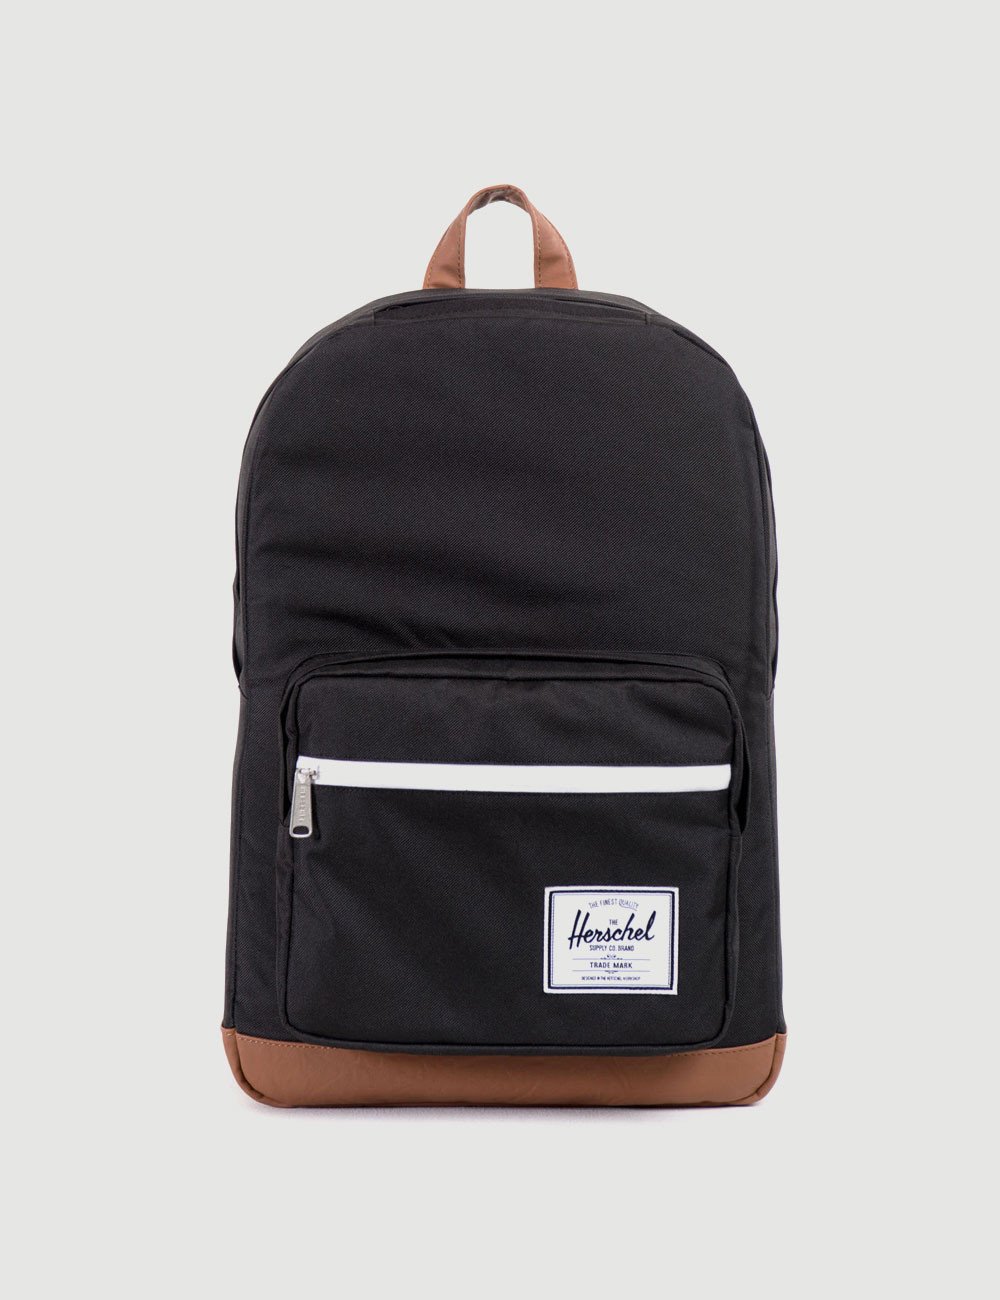 Herschel Pop Quiz Leather Black and Tan Synthetic Backpack from Mr. Simple